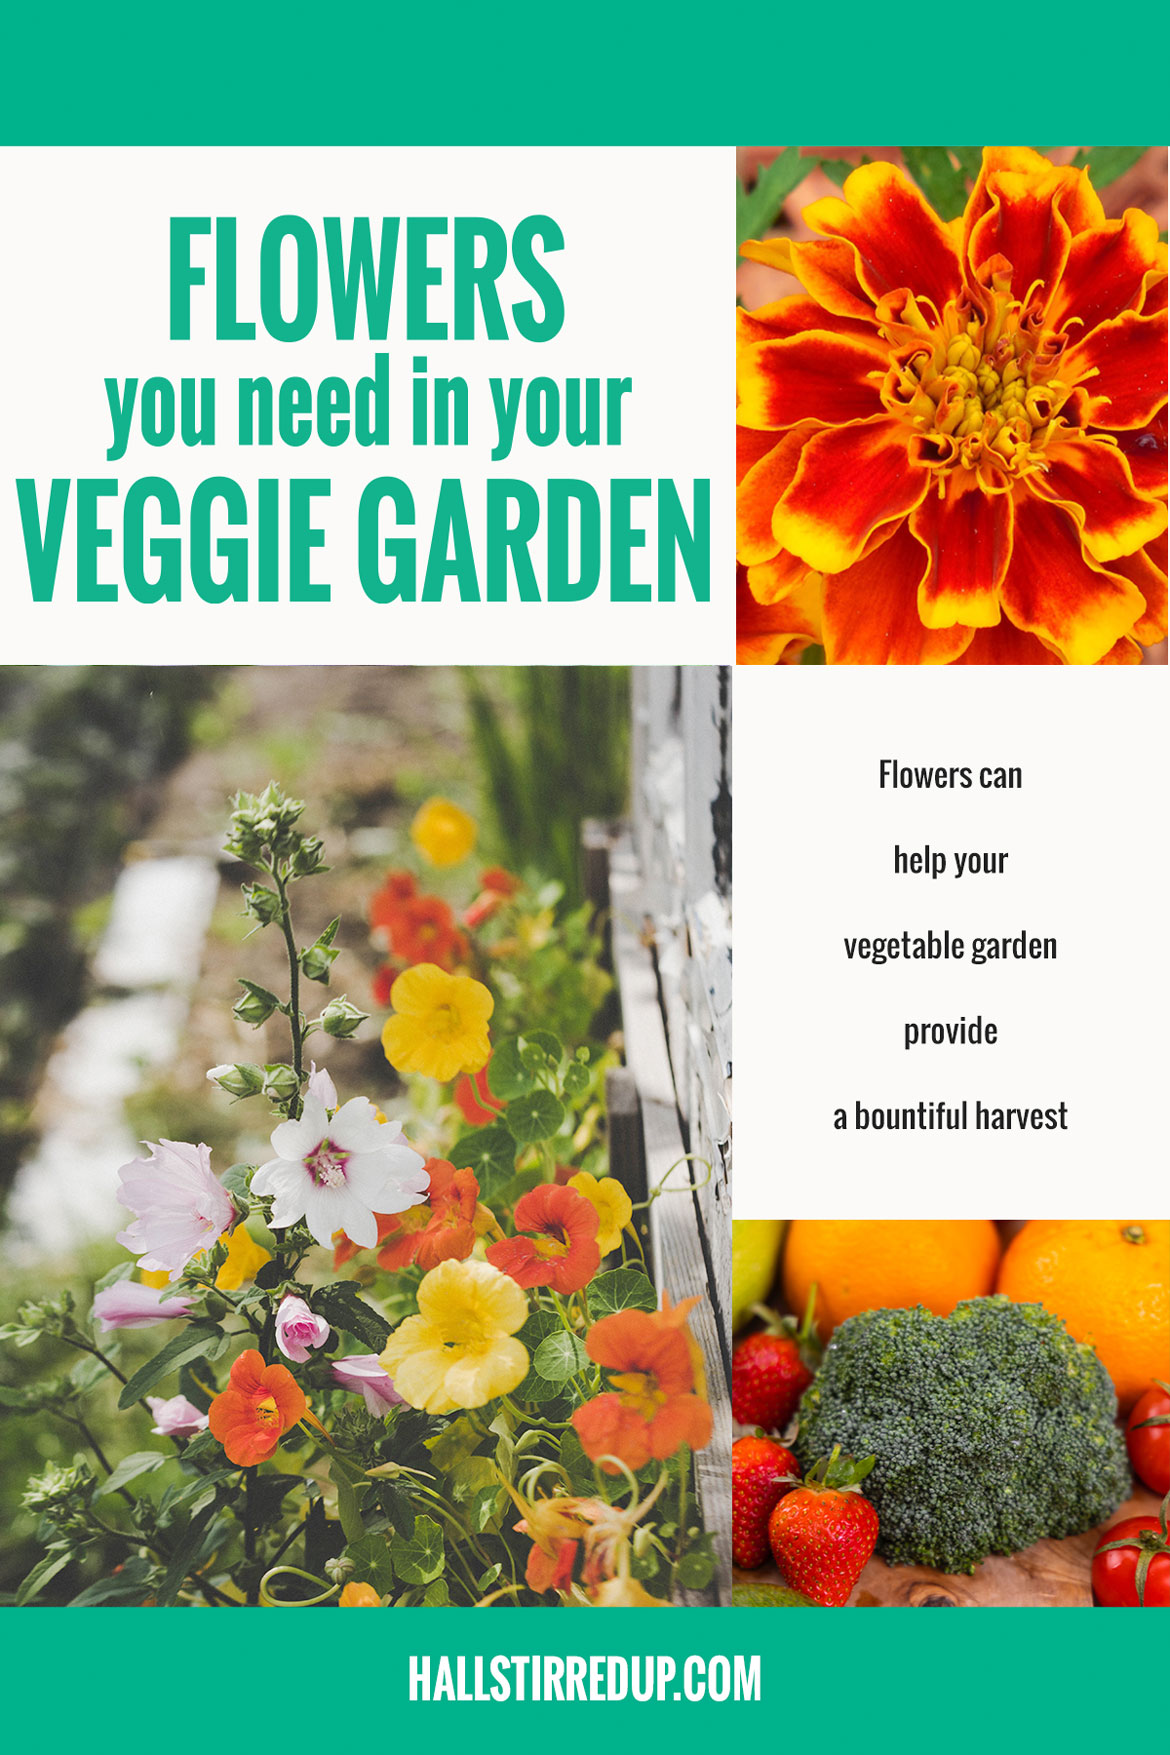 Why you need flowers in your veggie garden